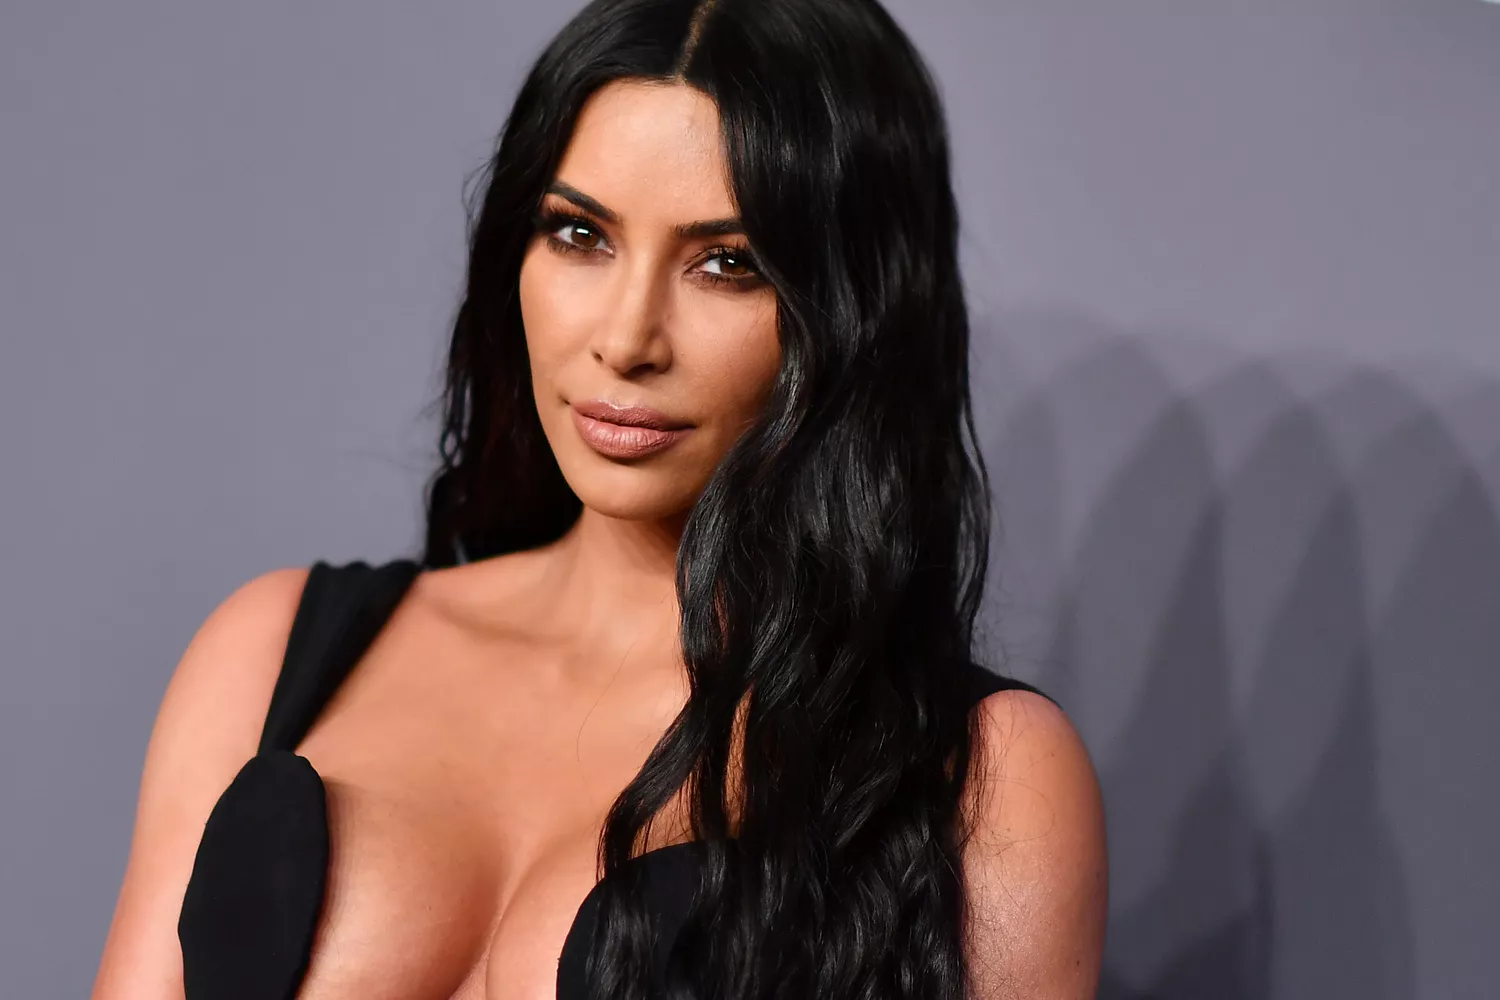 Kim Kardashian's Shimmer to Shadow: From Golden Selfies to 'American Horror Story' Debut